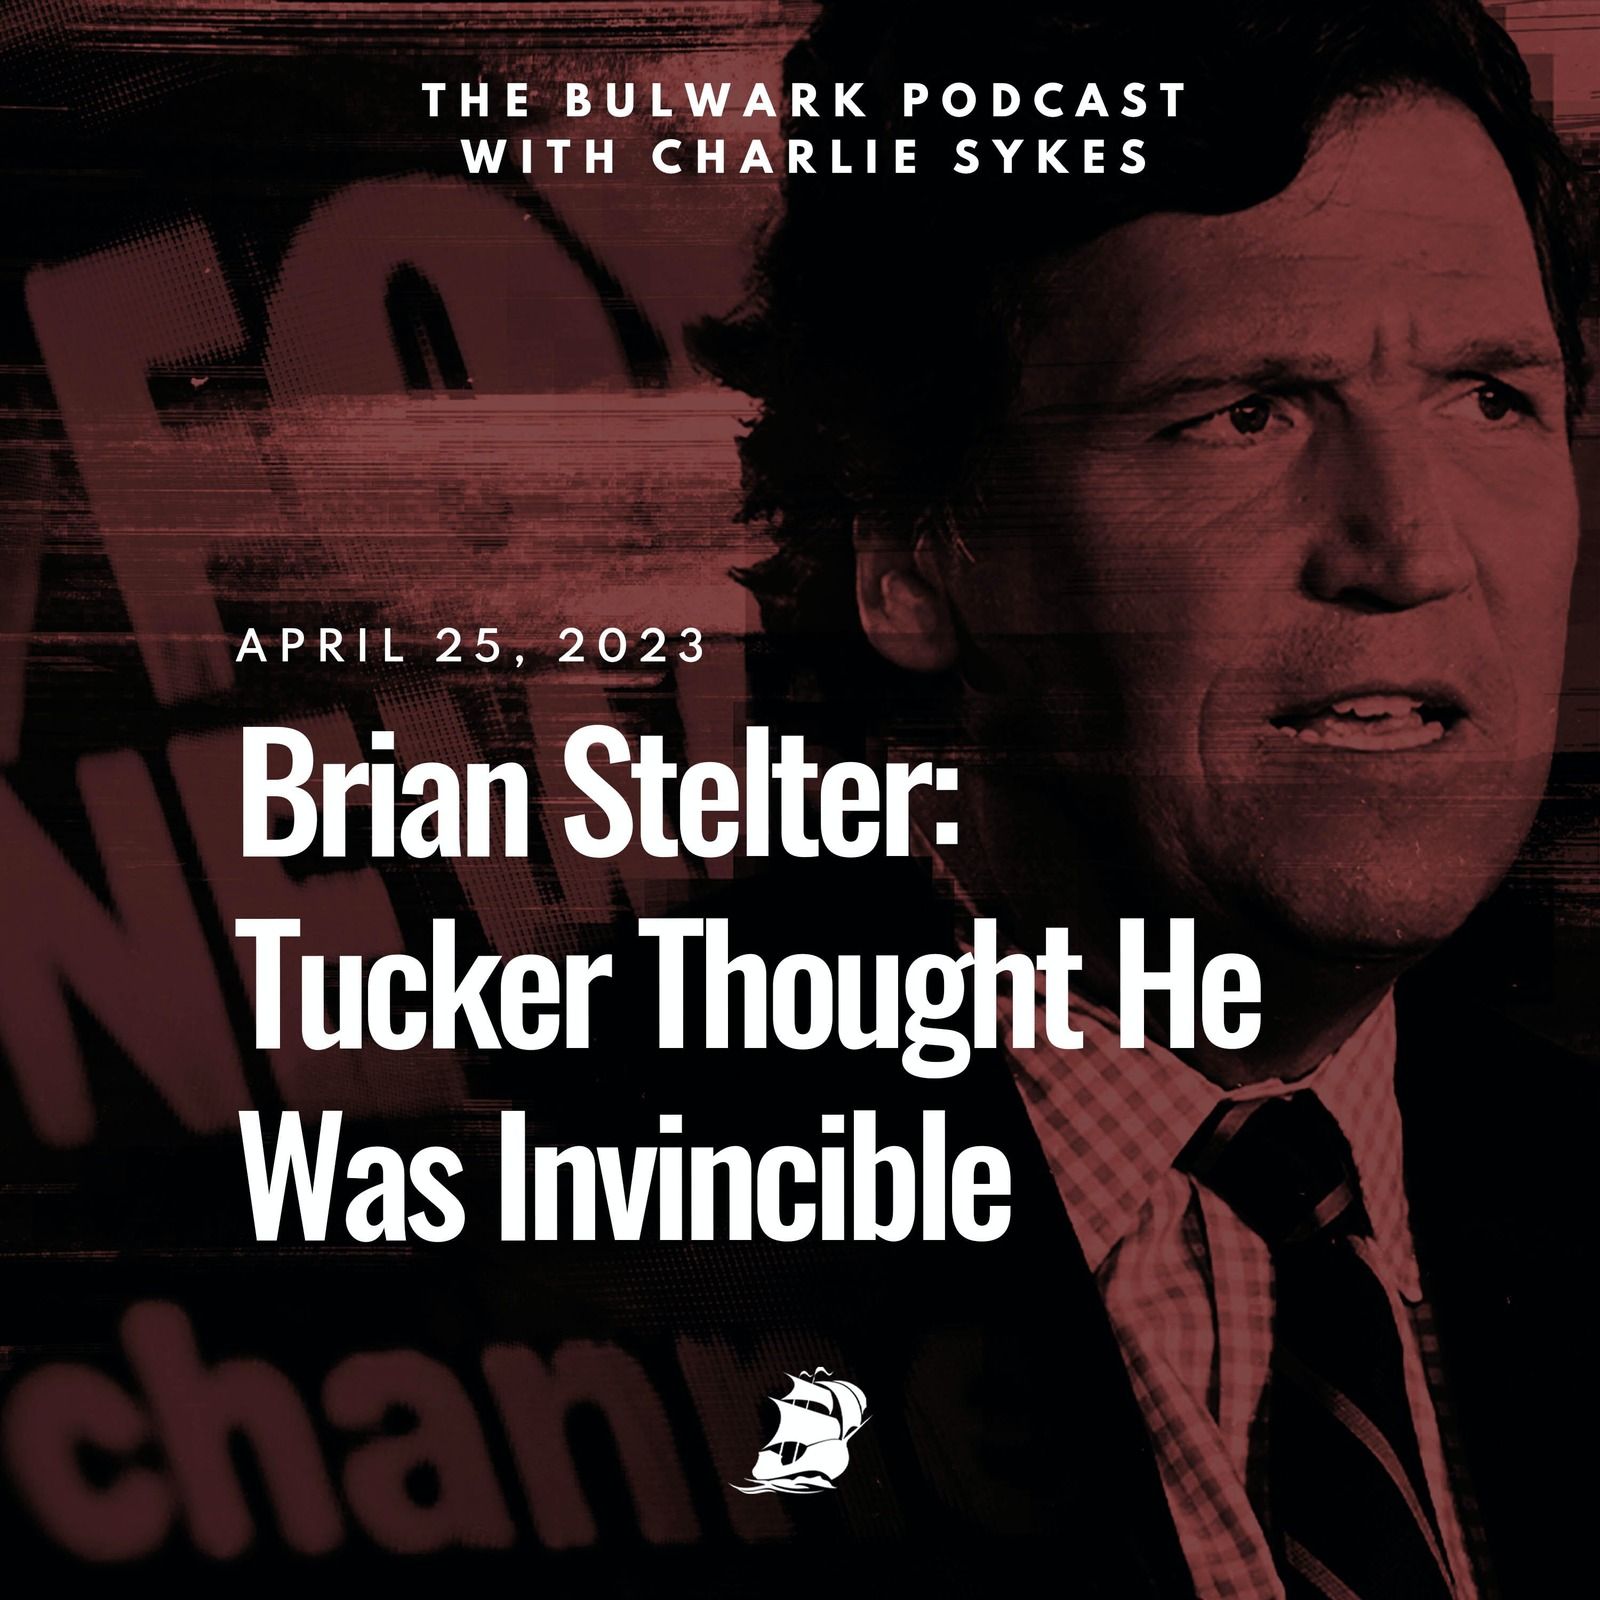 Brian Stelter: Tucker Thought He Was Invincible by The Bulwark Podcast